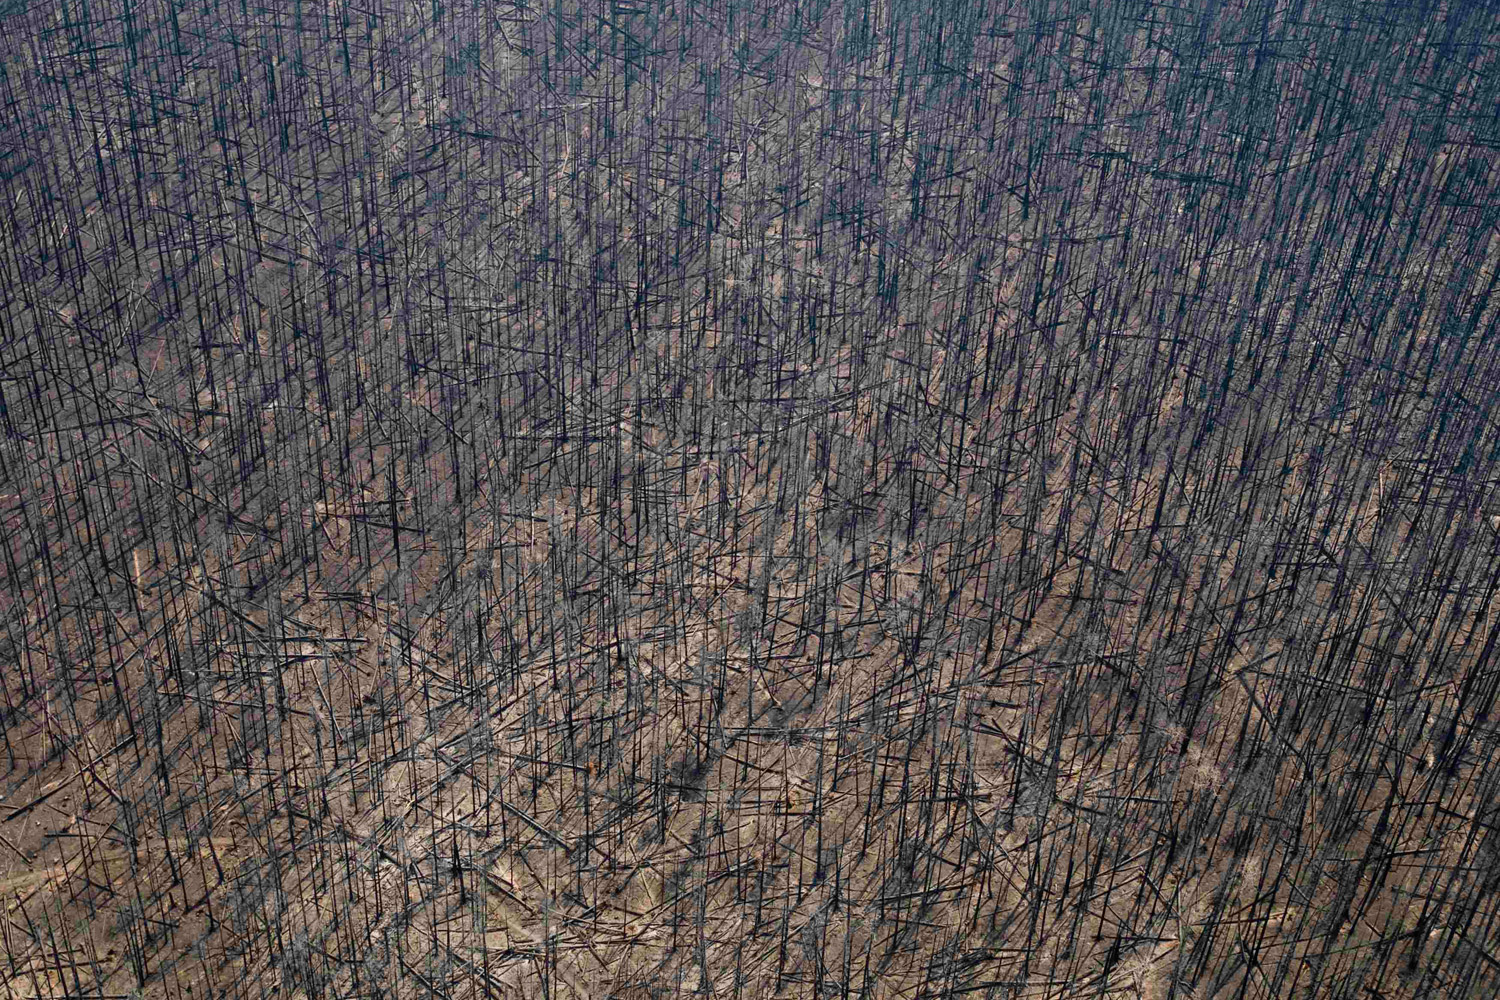 June 2, 2012. Charred trees are seen in the Gila National Forest as the result of a forest fire in the Whitewater-Baldy Complex in New Mexico. So far, 241,701 acres have been burned.